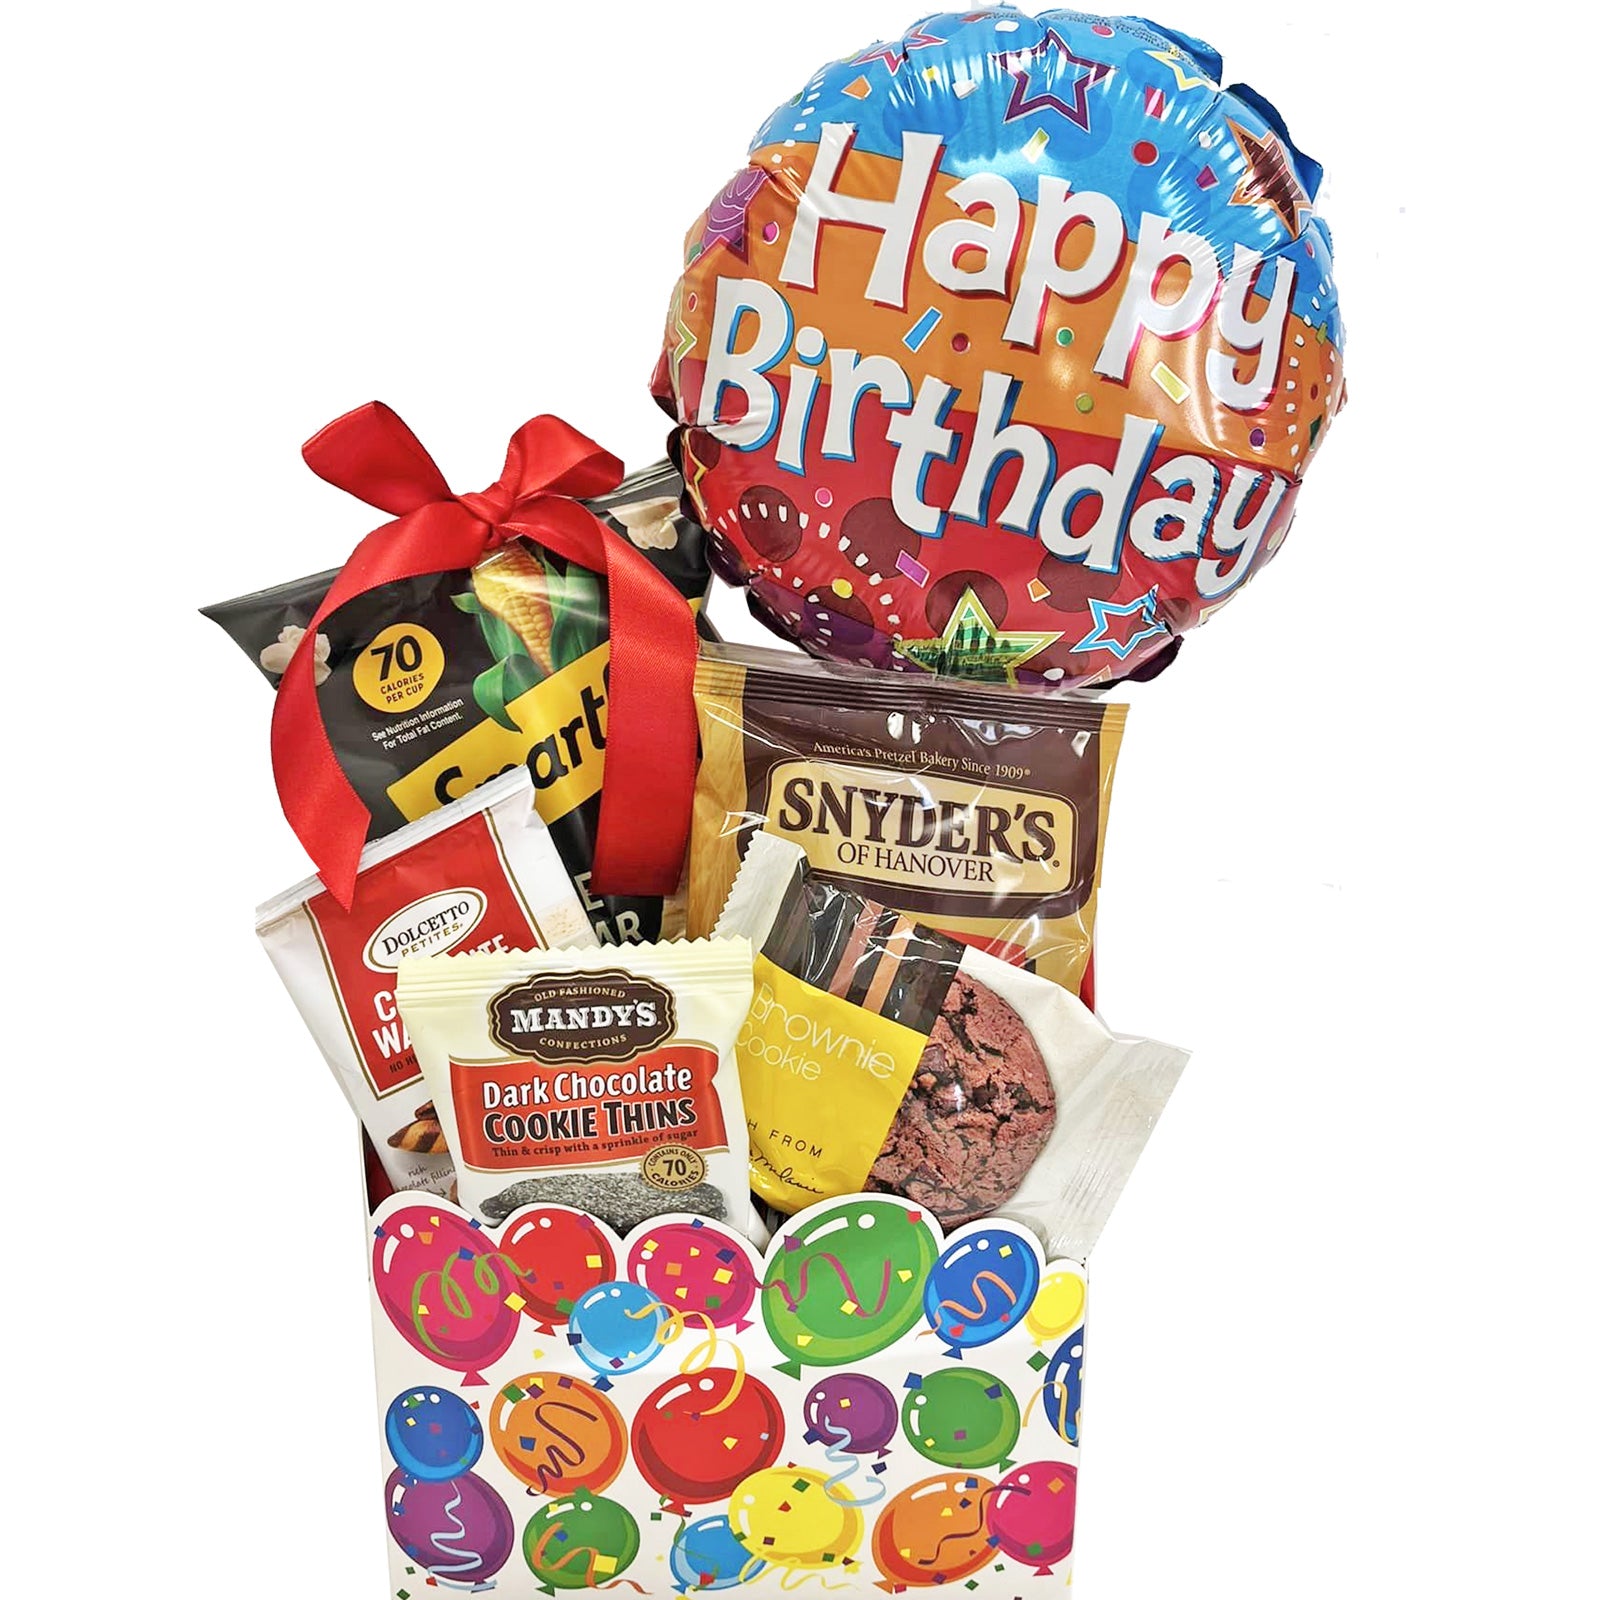 Birthday Gift Box with Cookies and Snacks and Happy Birthday Balloon for Men, Women, Friends and Family Unisex Birthday Gift